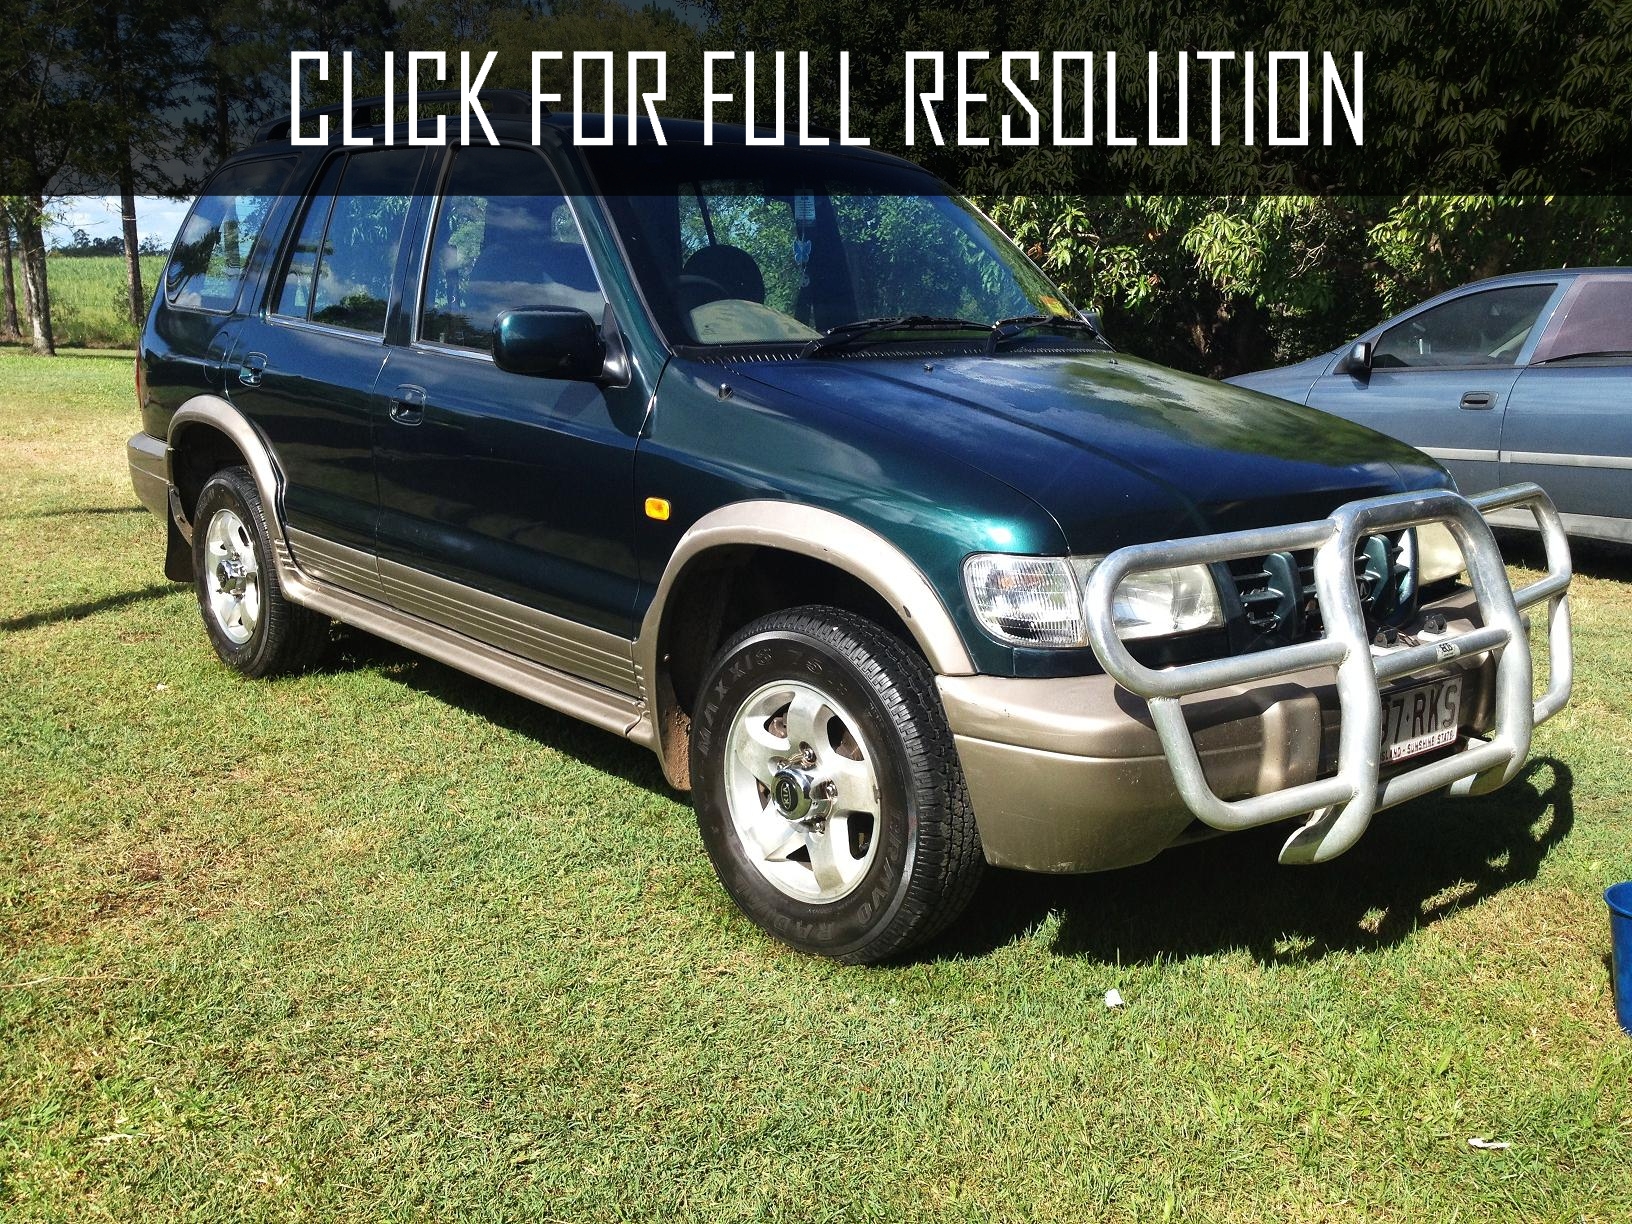 2000 Kia Sportage 4x4 news, reviews, msrp, ratings with